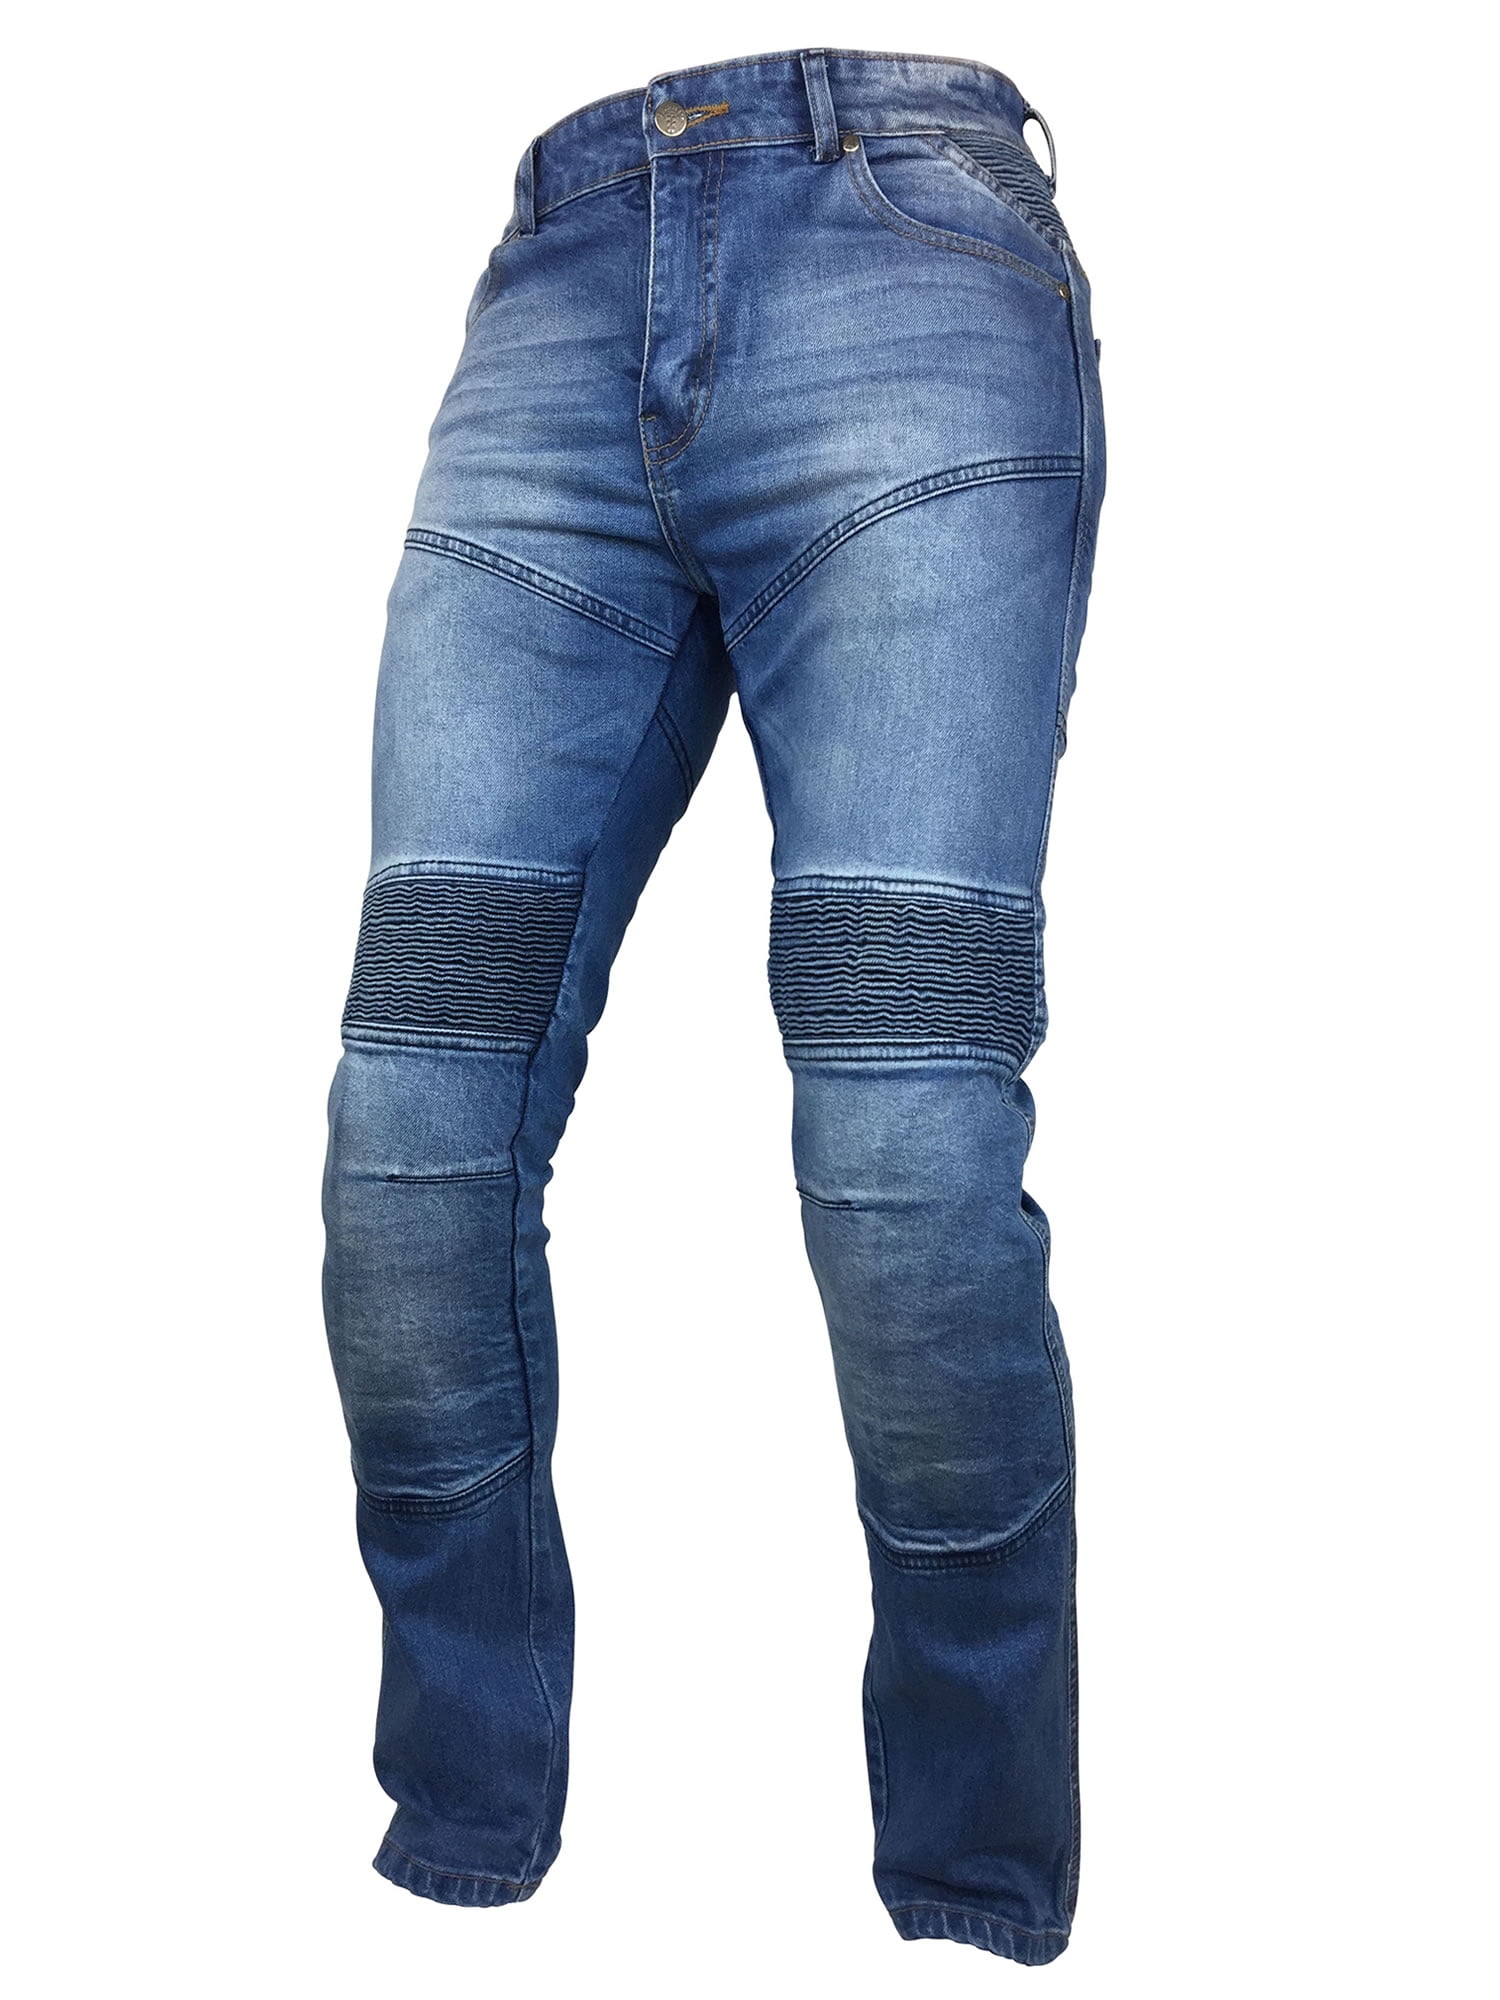 Men’s Denim Motorcycle Motorbike Sports Jeans with Protective Lined Armoured 